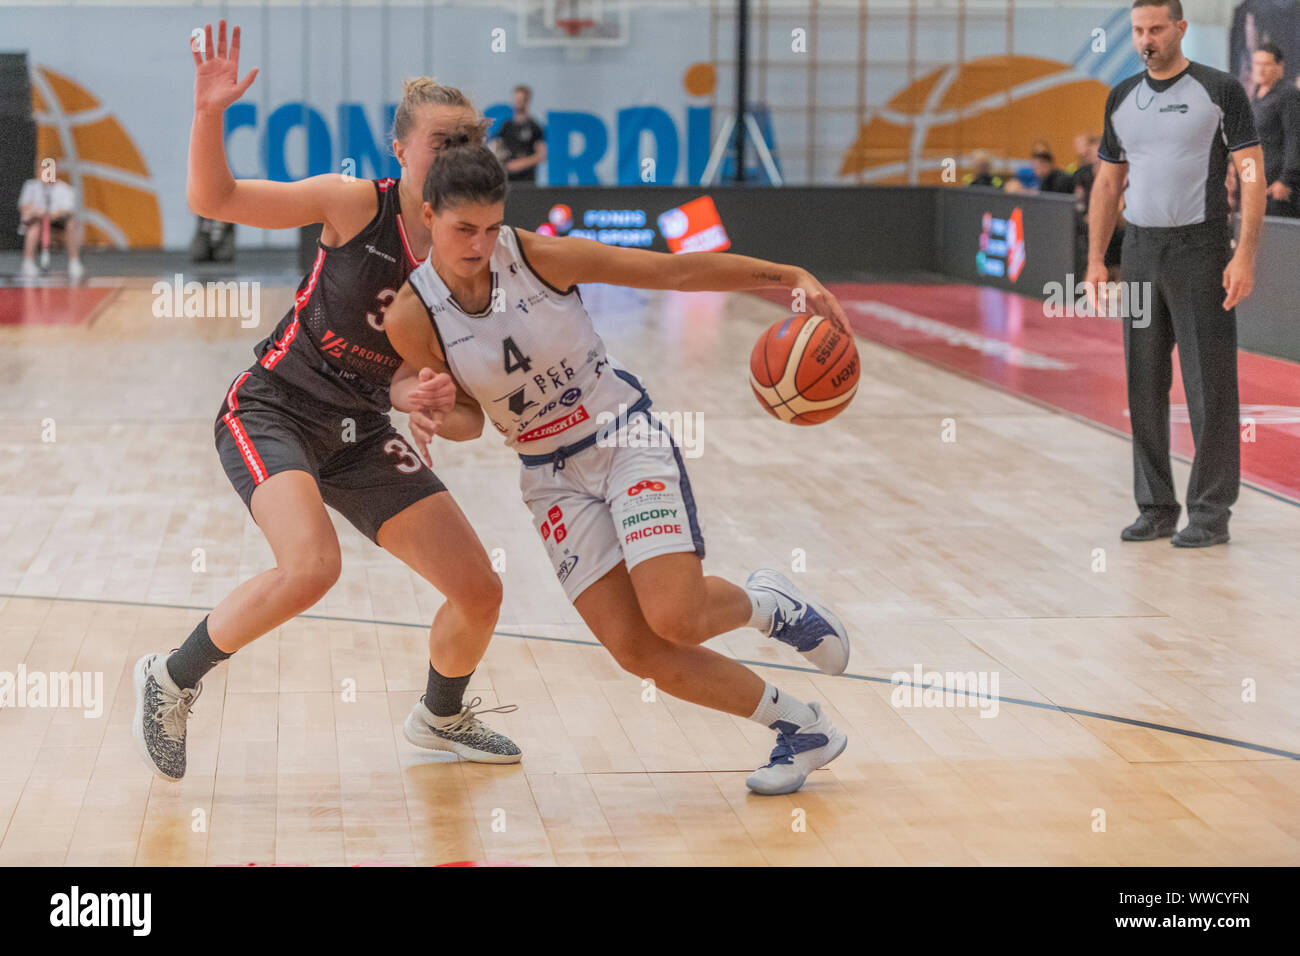 Yverdon Les Bains, Switzerland. 14th Sep, 2019. Fora Nancy (R) during BCF  ELFIC Fribourg victory over BC Winterthur (73-63) in the Final win at the  Super Cup 2019 at the Yverdon-les-Bains Sports